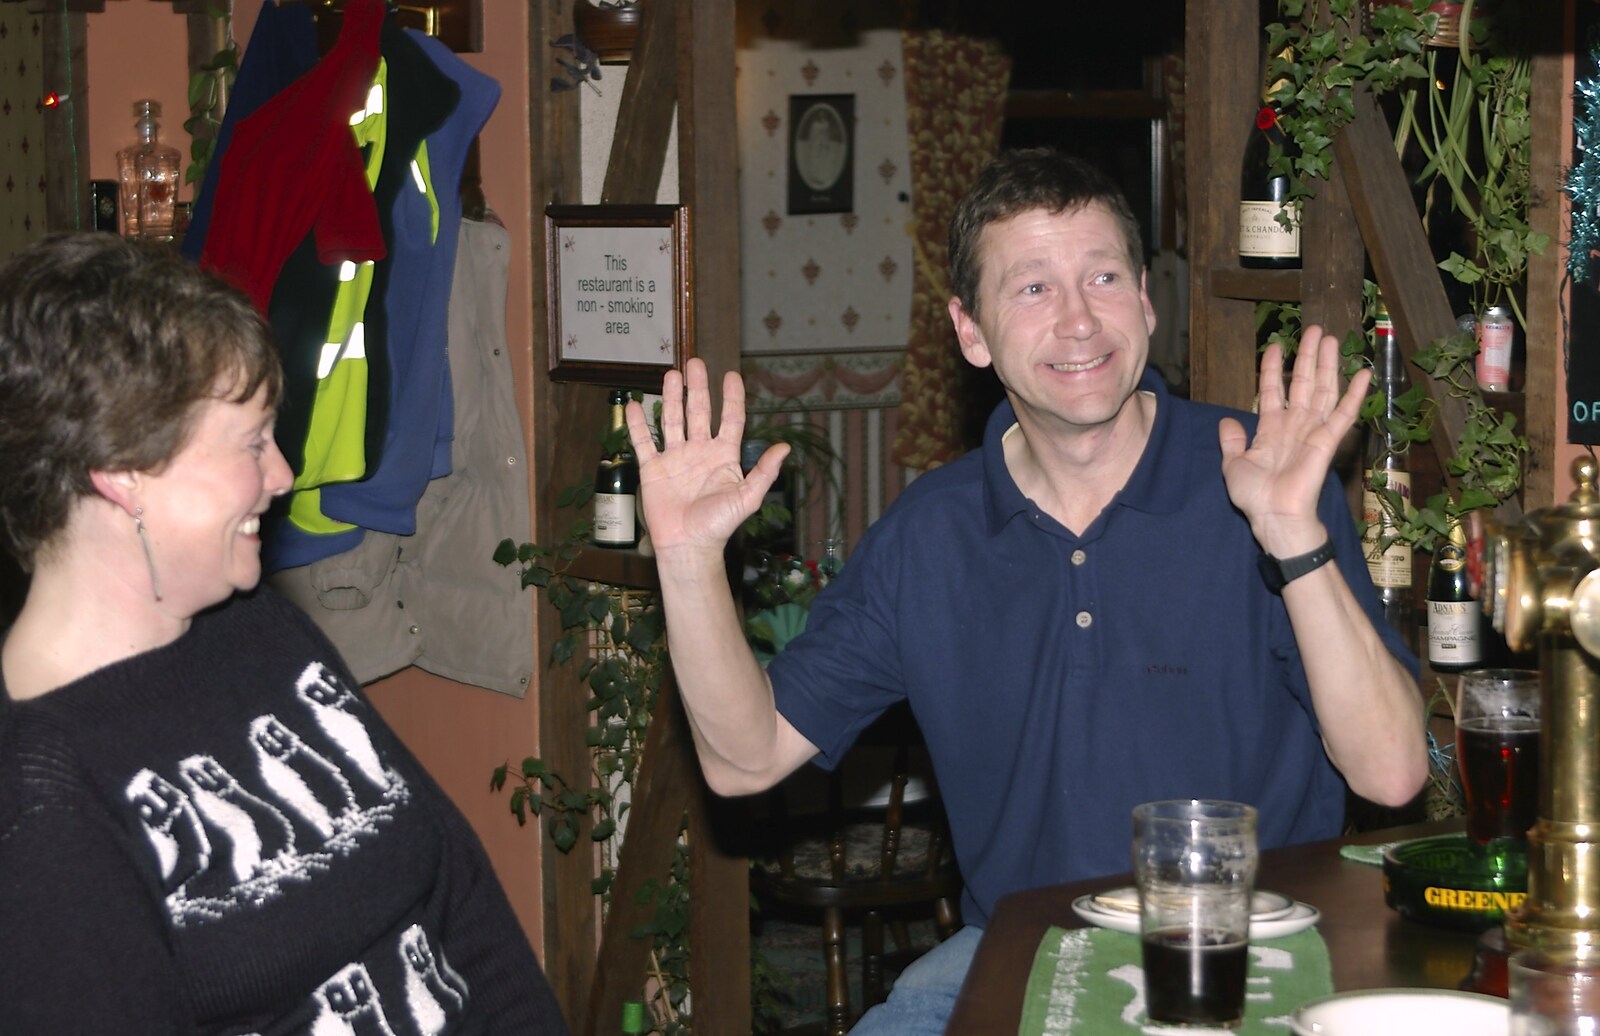 New Year's Eve at the Brome Swan, Brome, Suffolk - 31st December 2004: Apple sticks his hands up